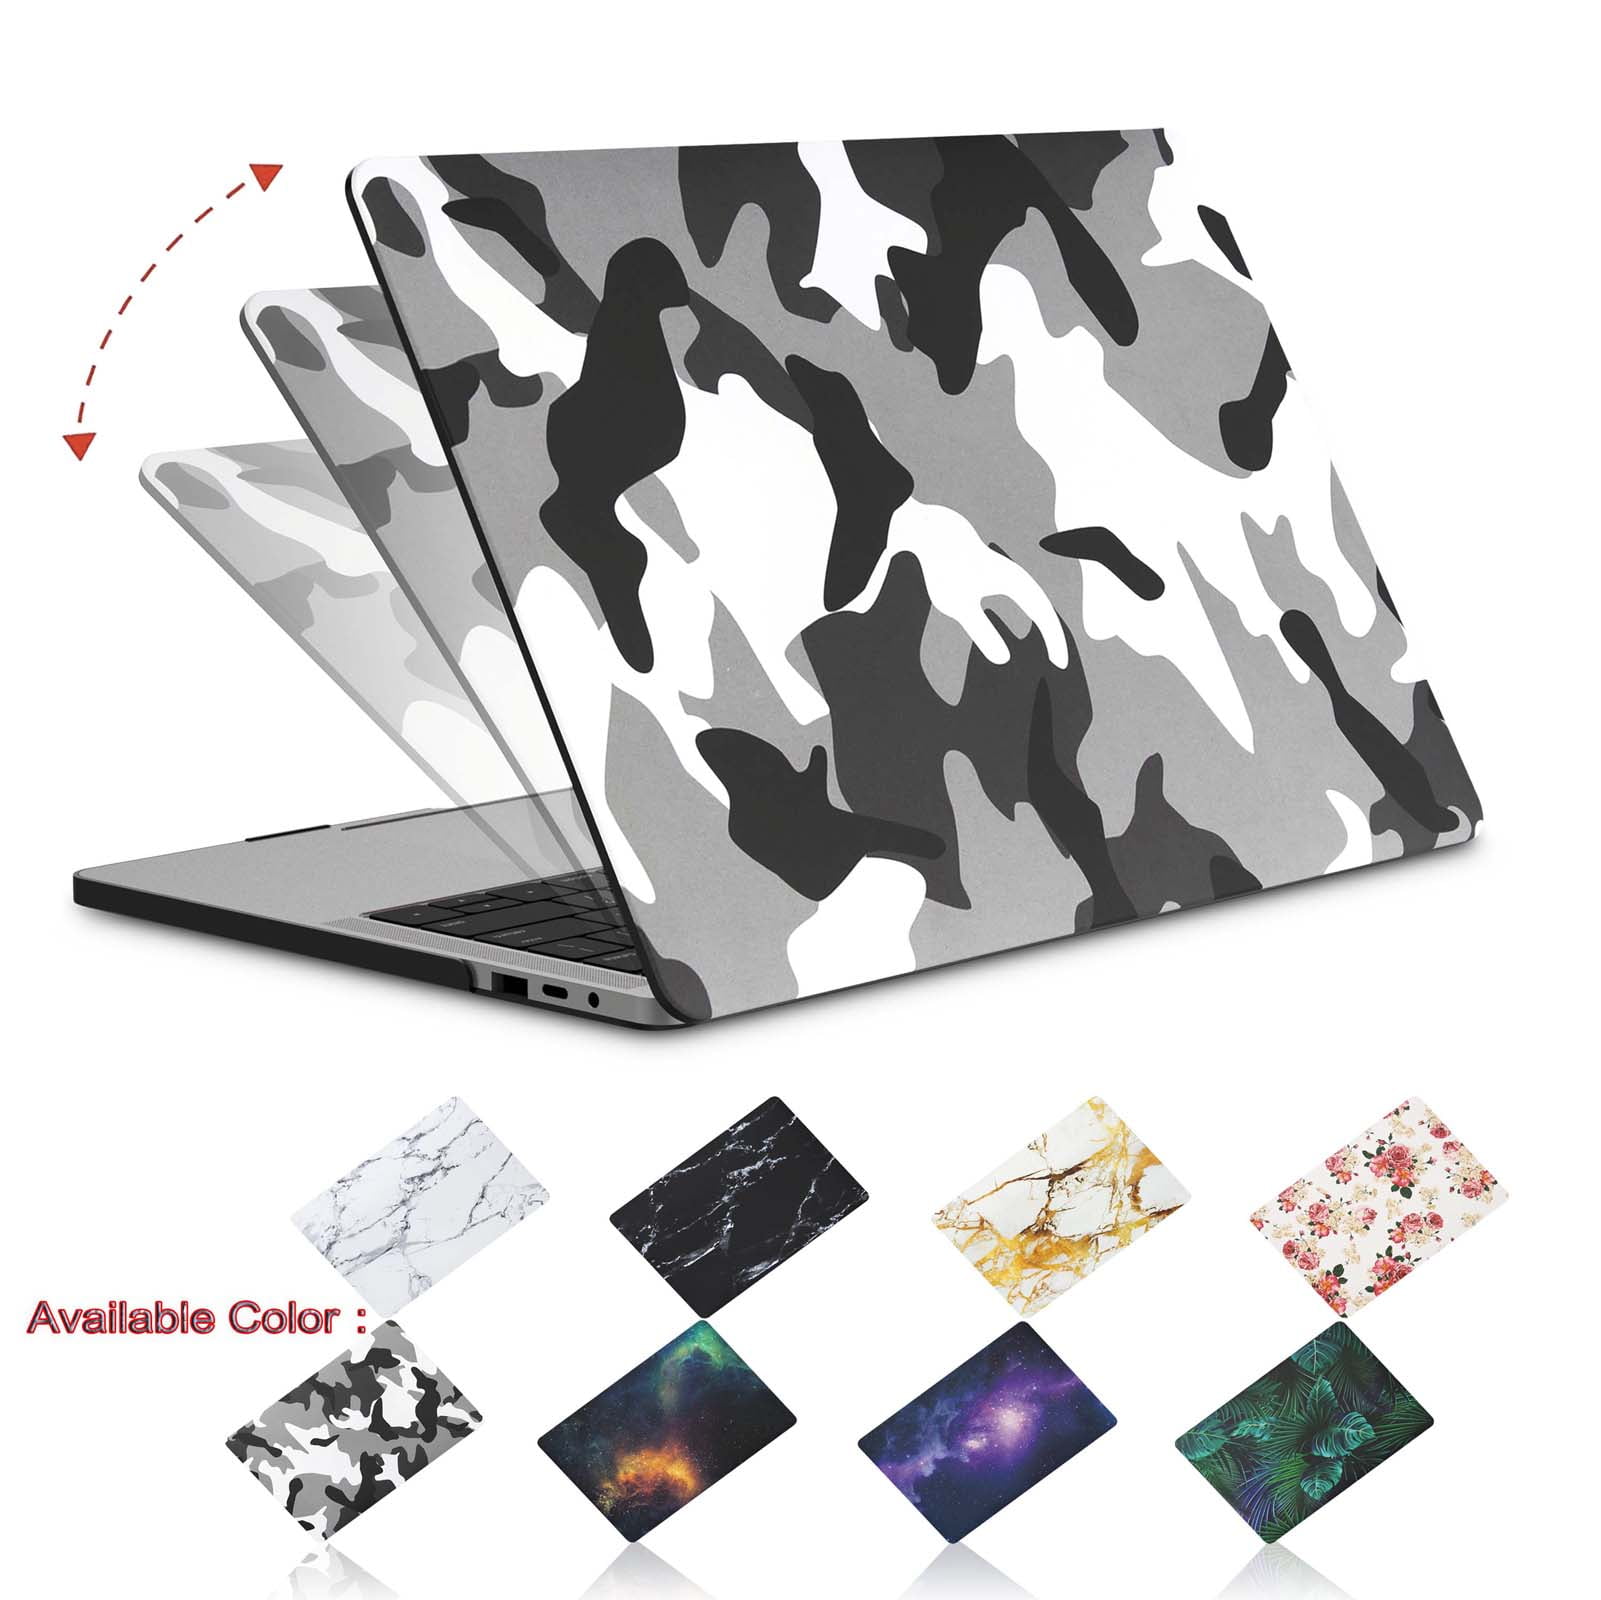 Best Buy: Techprotectus Hard case for MacBook Air 13 inch- models: A1369 /  A1466, Release 2017 / 2016 / 2015 / 2014 / 2013 / 2012. TP-CYCL-K-MA13